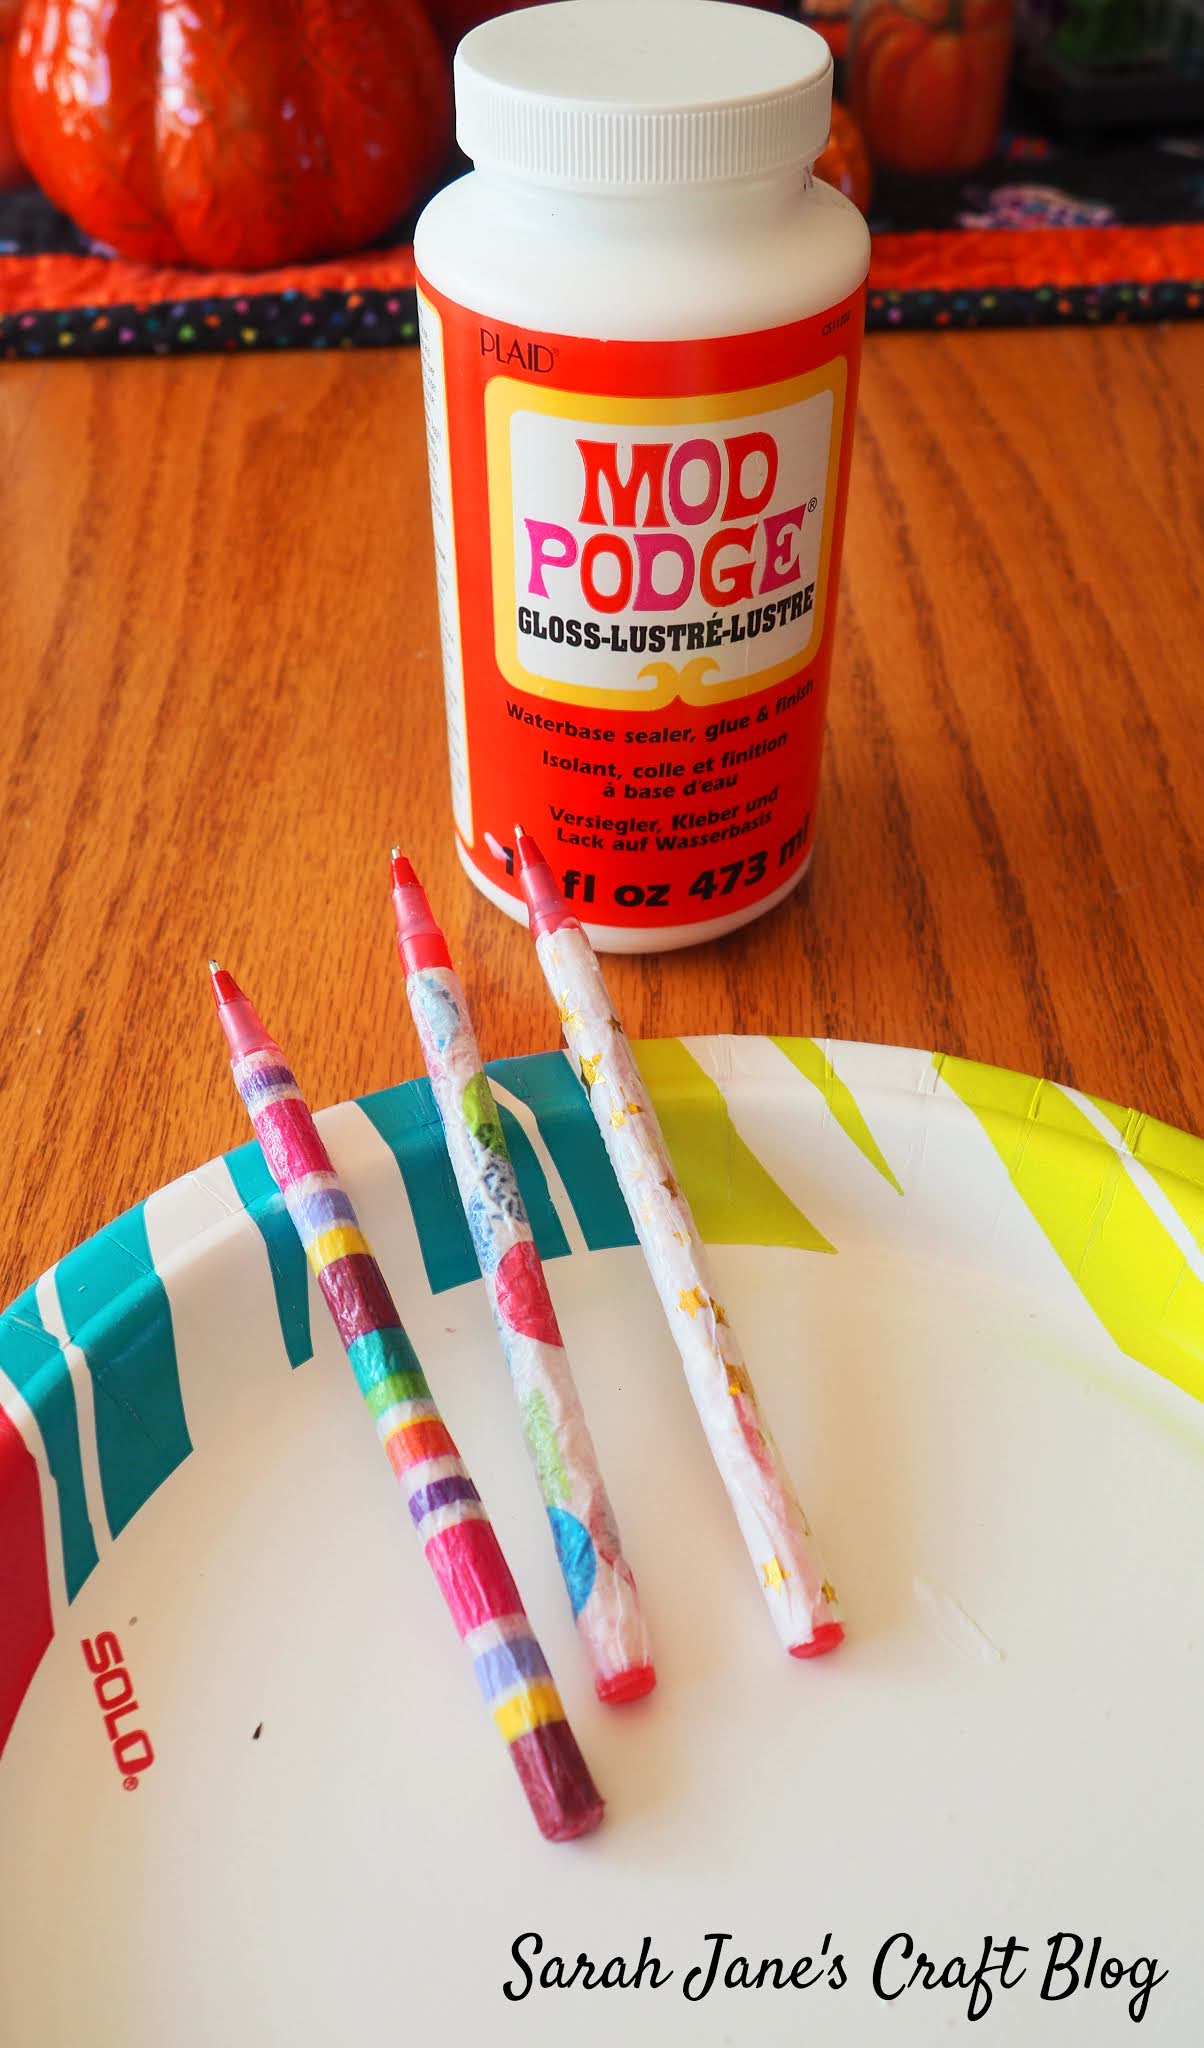 Crafty Secrets: An Insider's Mod Podge Tips and Tricks on how to